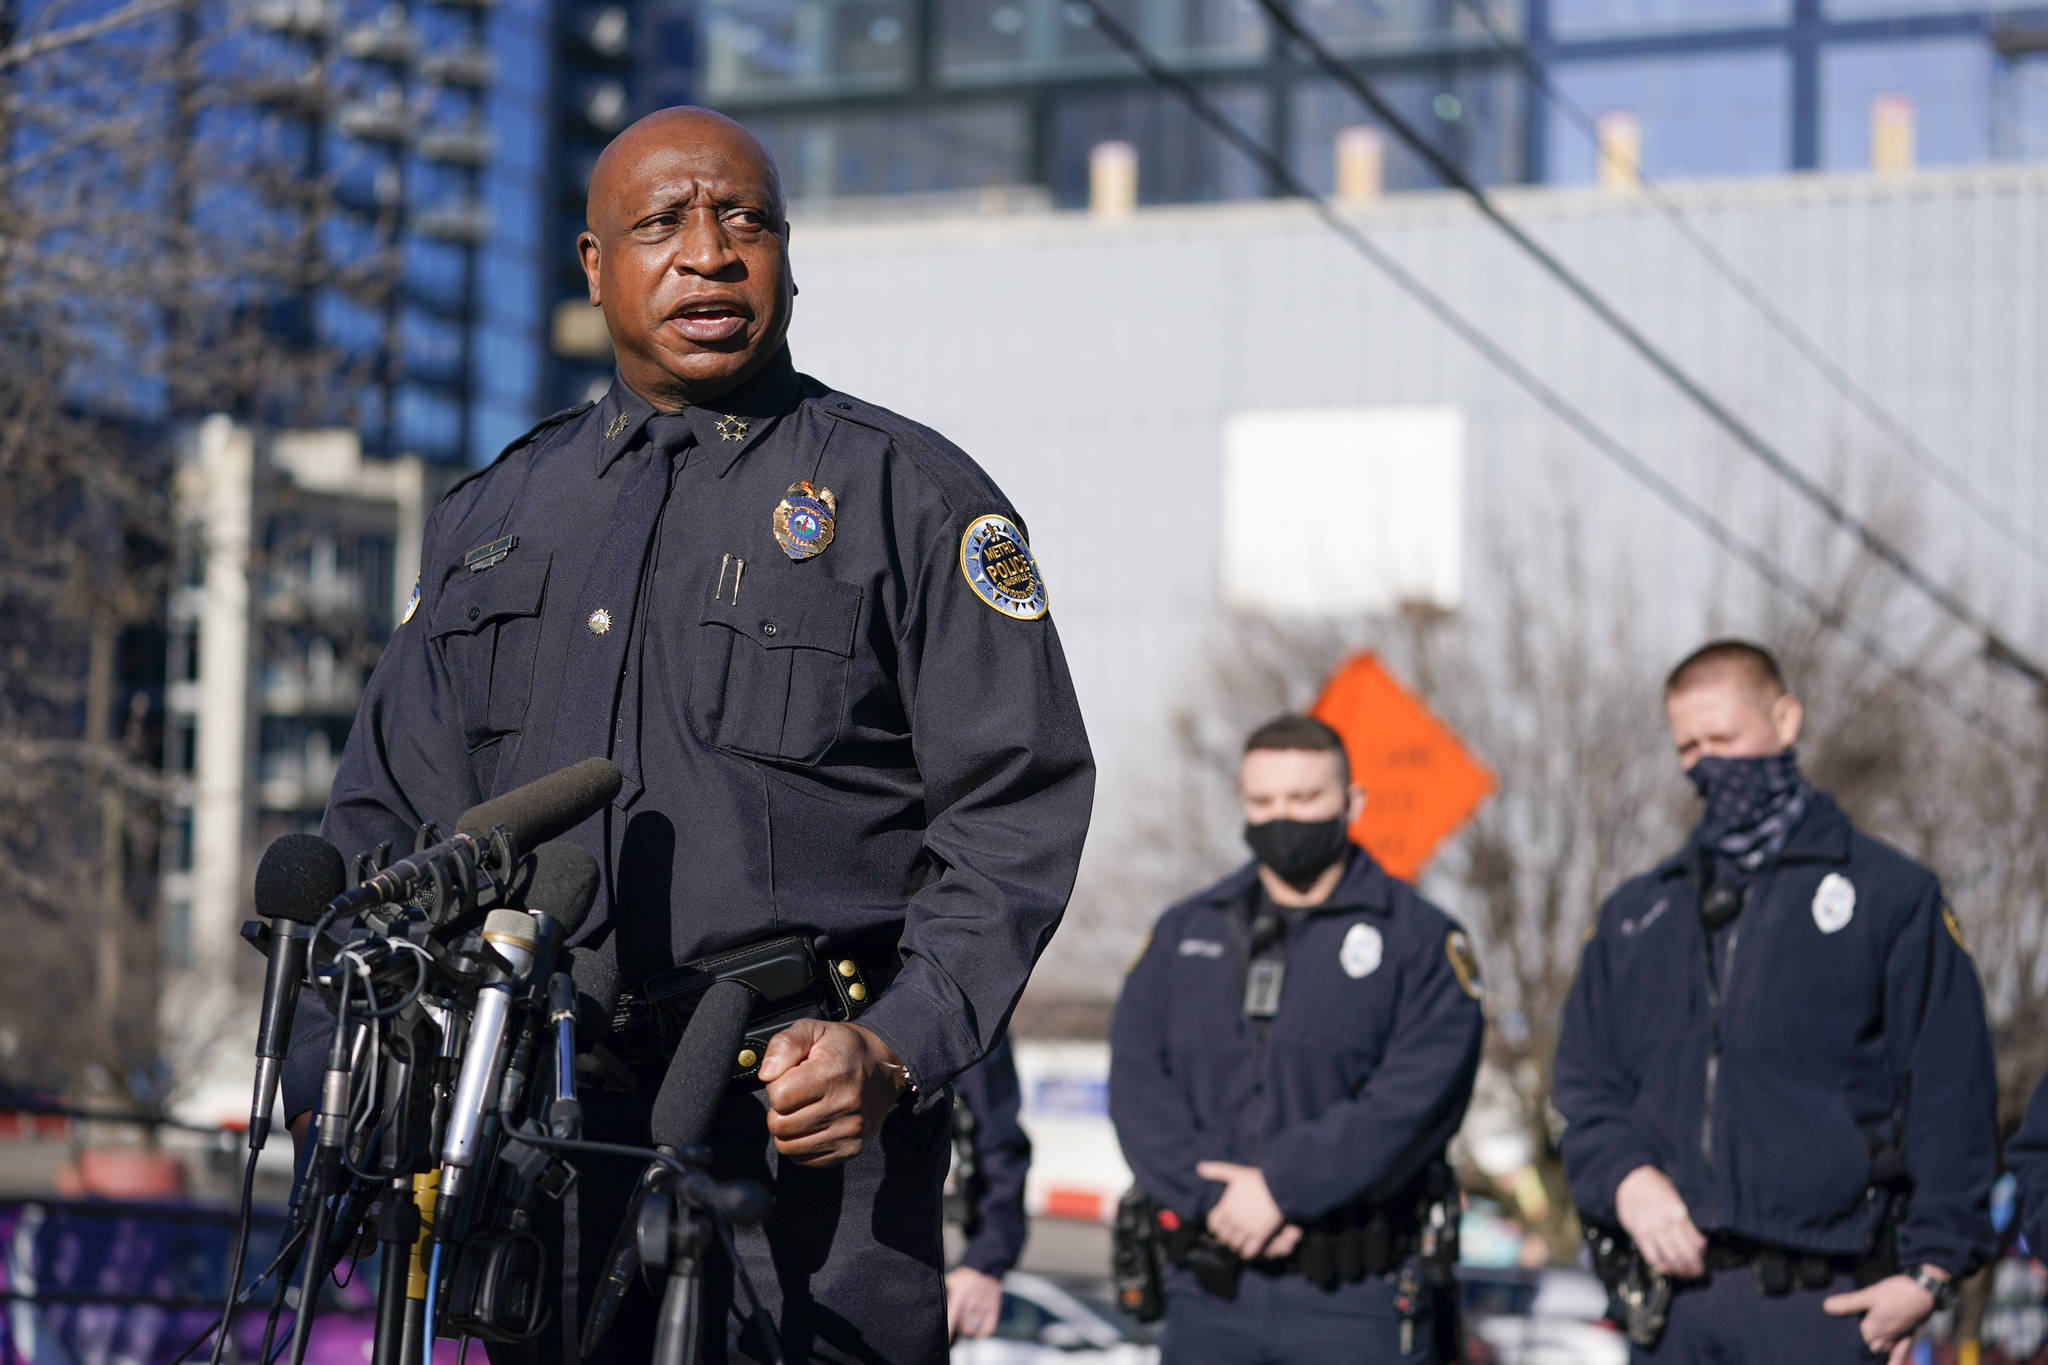 Nashville Chief of Police John Drake speaks at a news conference Sunday, Dec. 27, 2020, in Nashville, Tenn. Drake spoke before five officers told what they experienced when an explosion took place in downtown Nashville early Christmas morning. The officers are part of a group of six officers credited with evacuating people before the explosion happened. Behind Drake are two of the officers, Michael Sipos, center, and Richard Luellen, right. (AP Photo/Mark Humphrey)